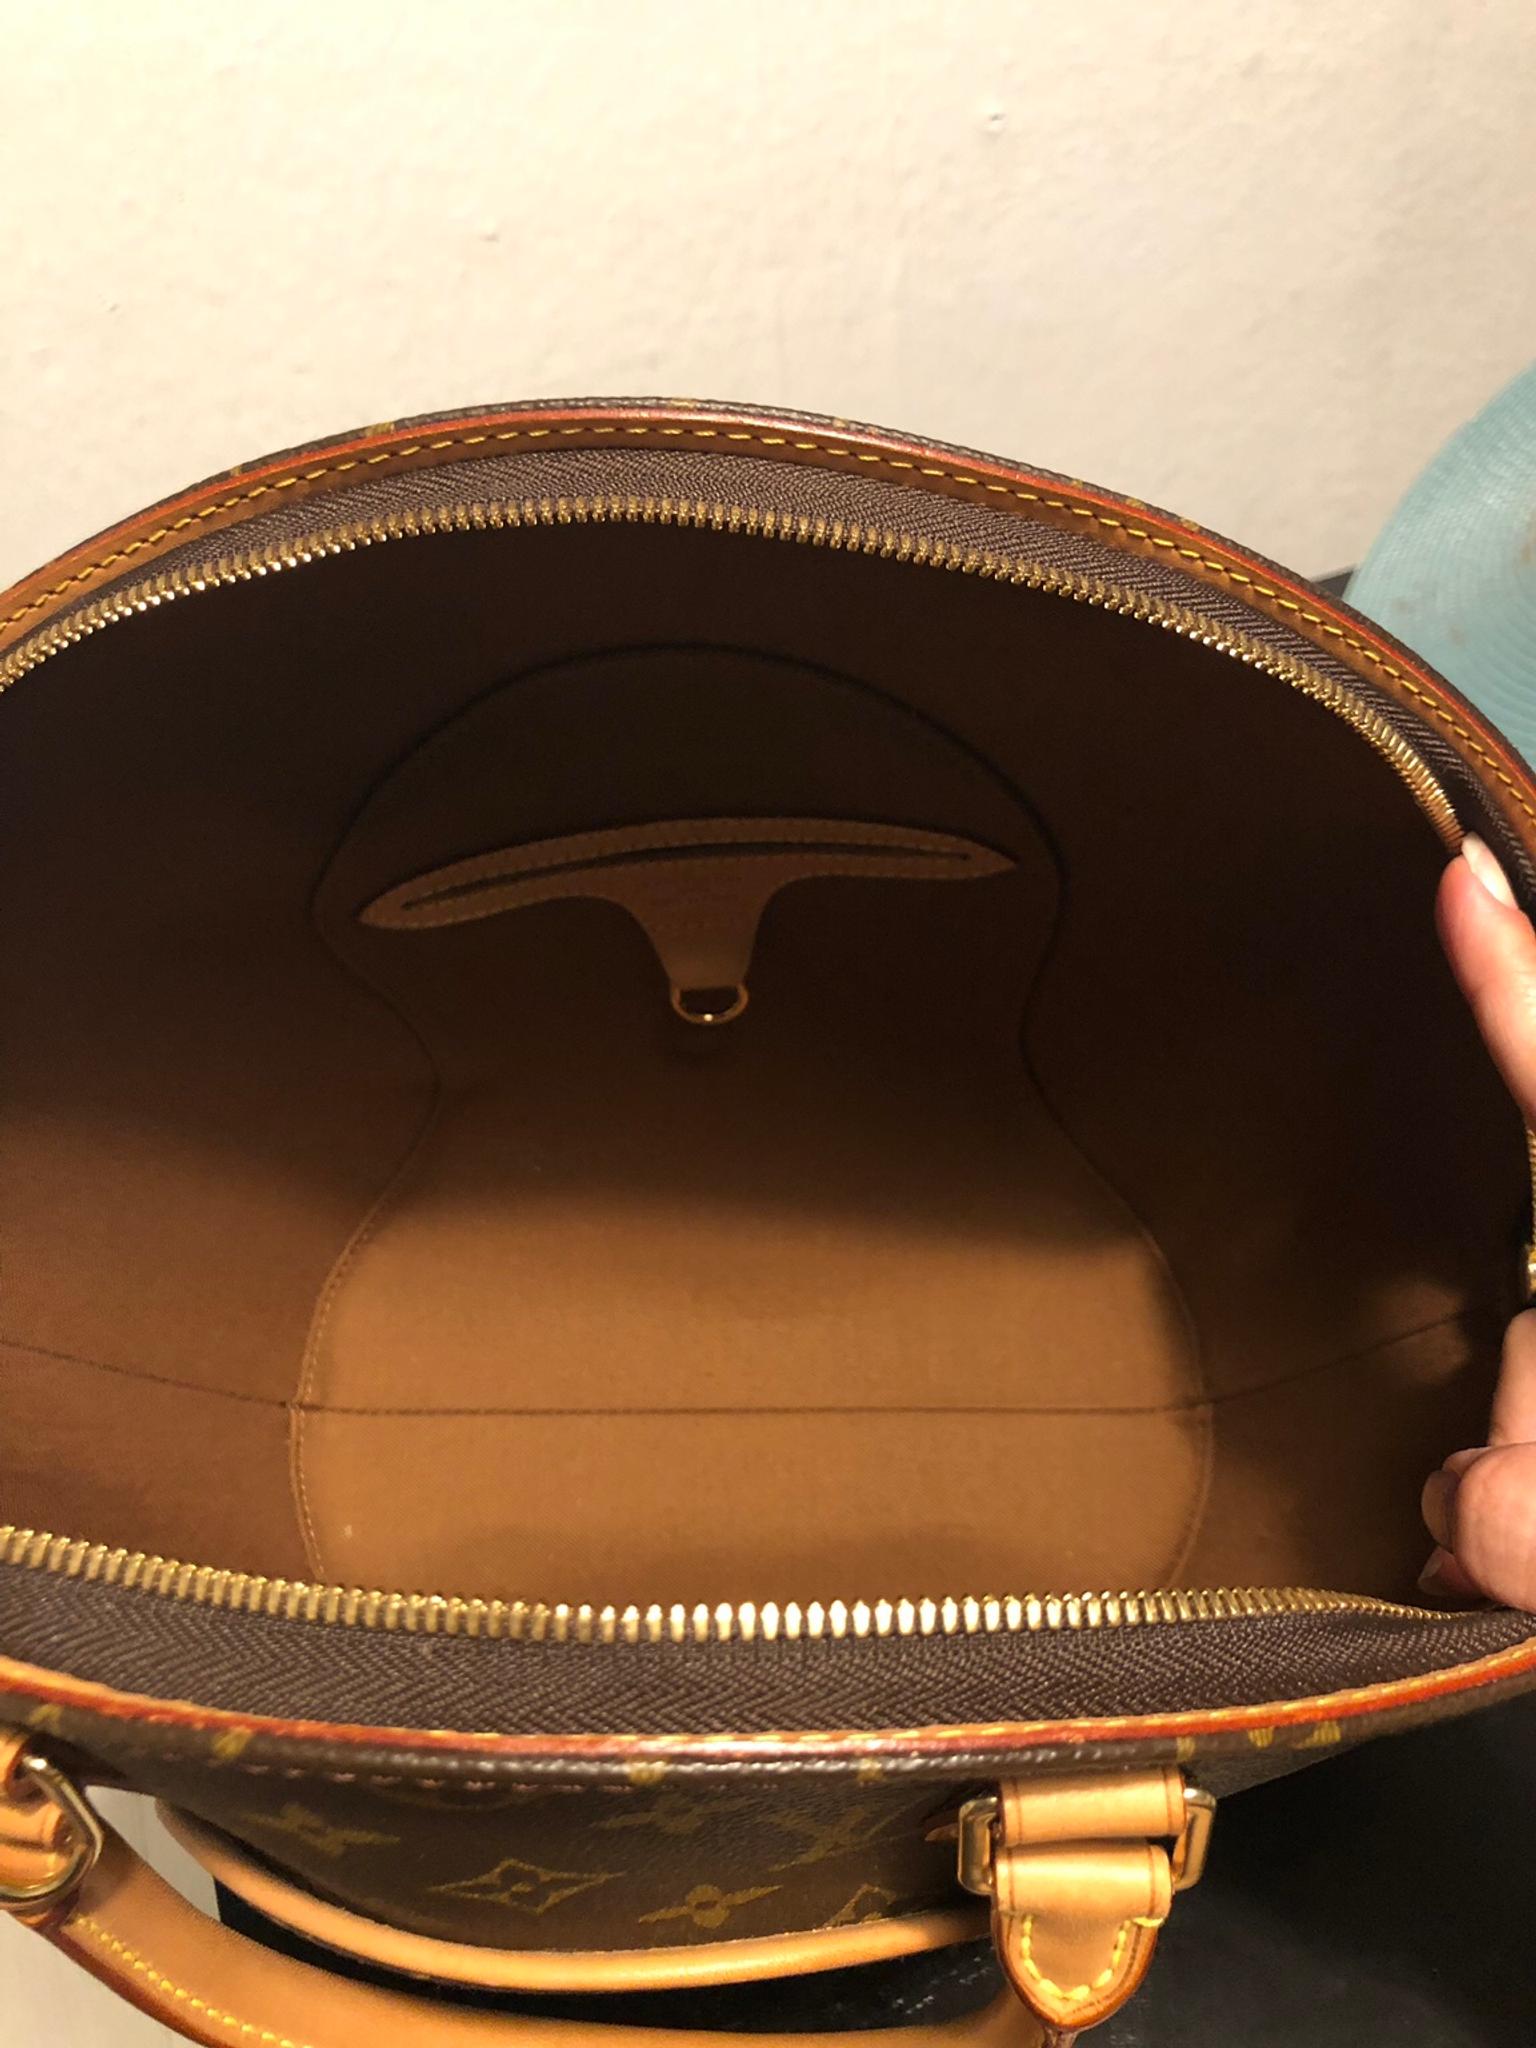 Louis Vuitton Ellipse Tasche in 76139 Karlsruhe for €700.00 for sale | Shpock